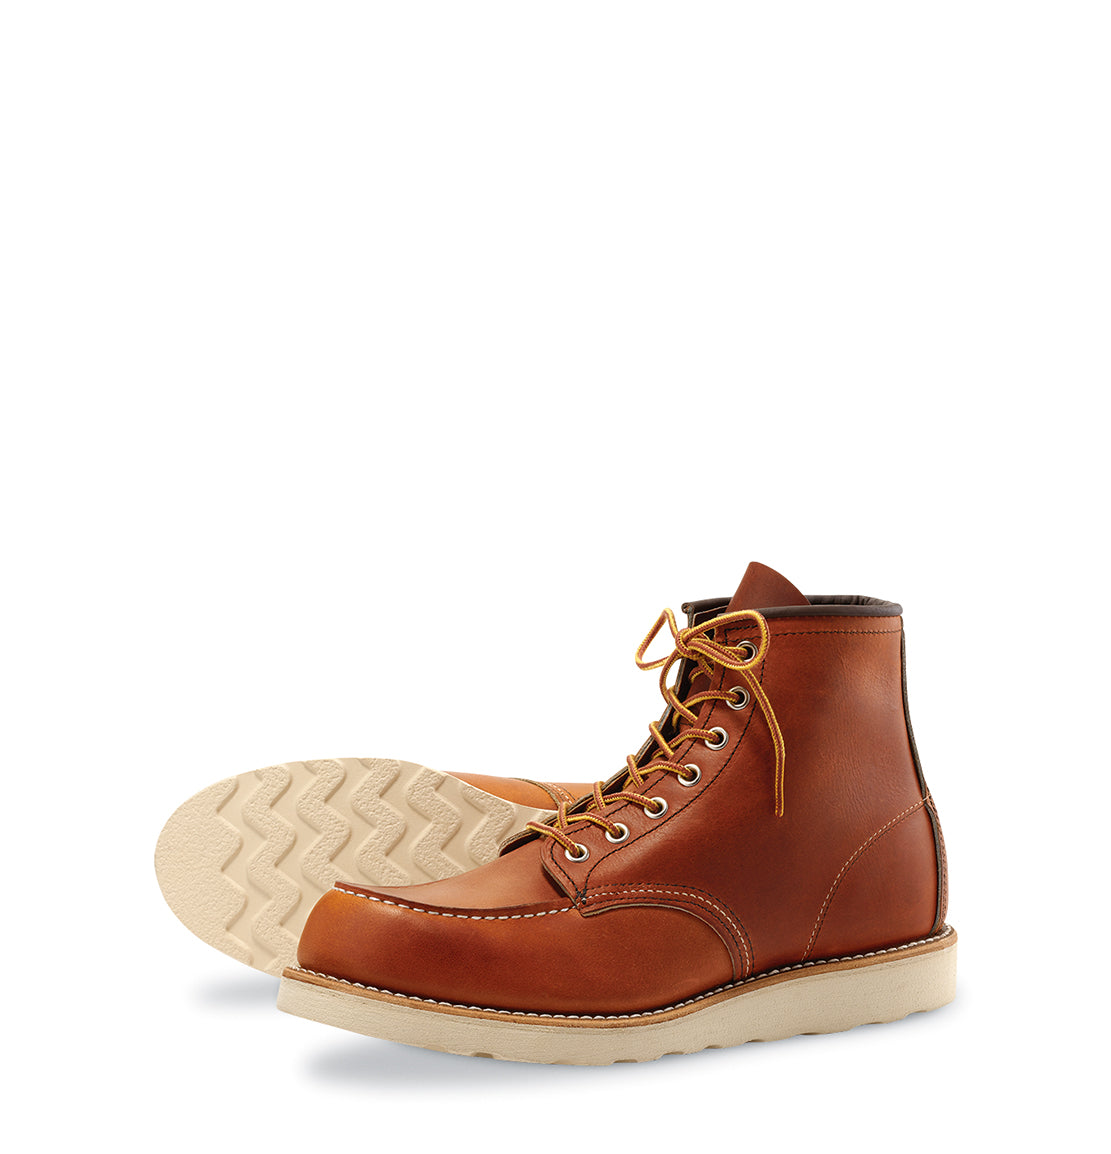 Redwing shoe laces Leicester